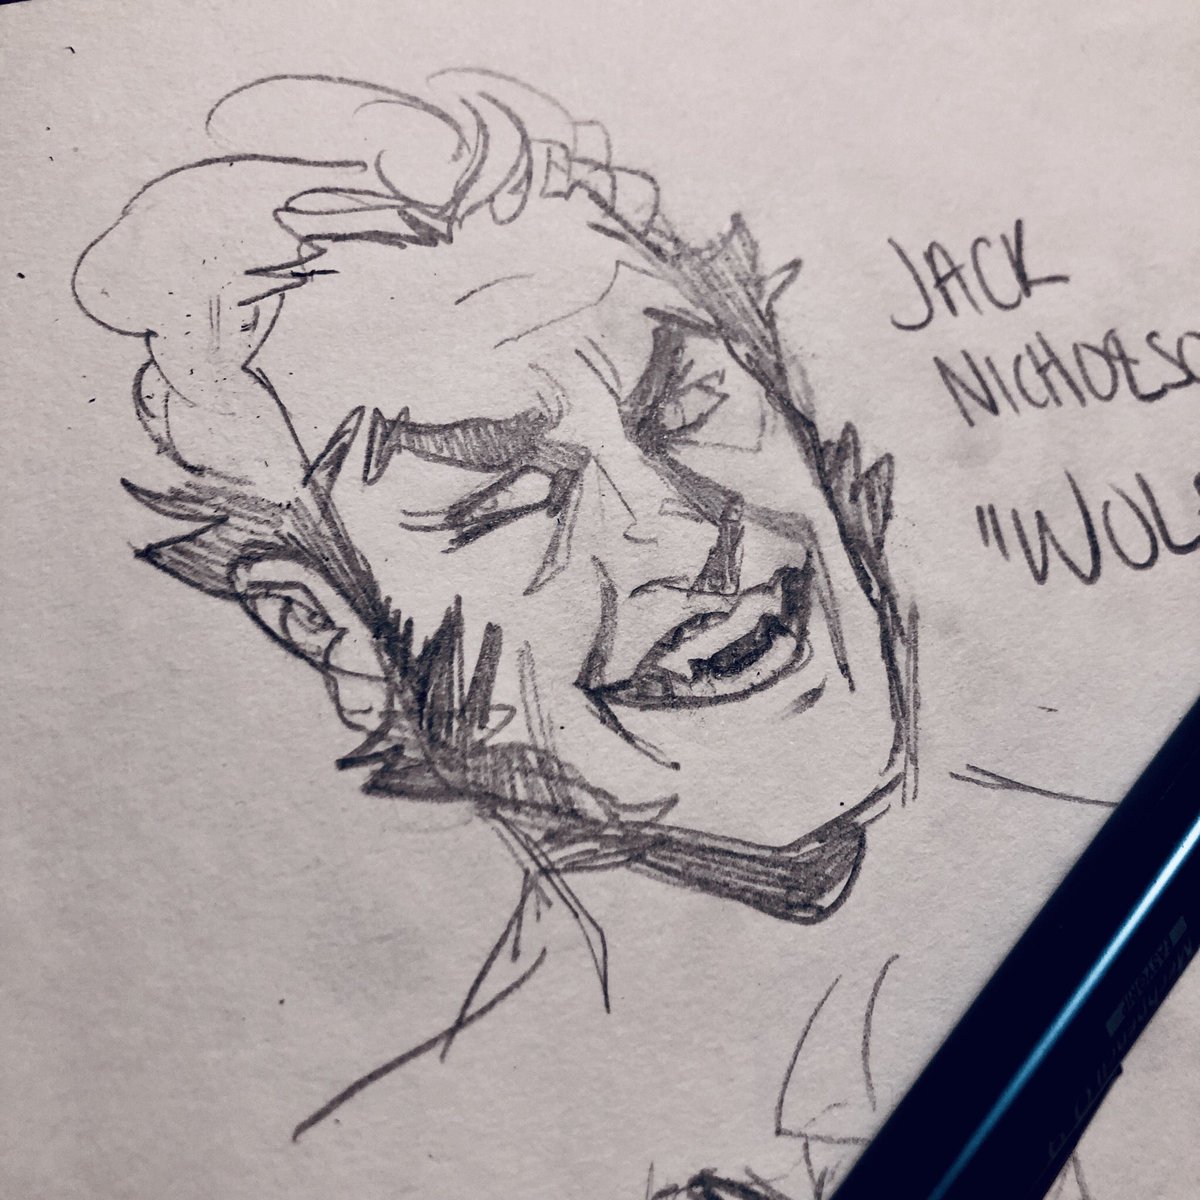 Ty @hxrryjxke for reminding me how much I love jack nicholson's eyebrows.. also christian slater's 